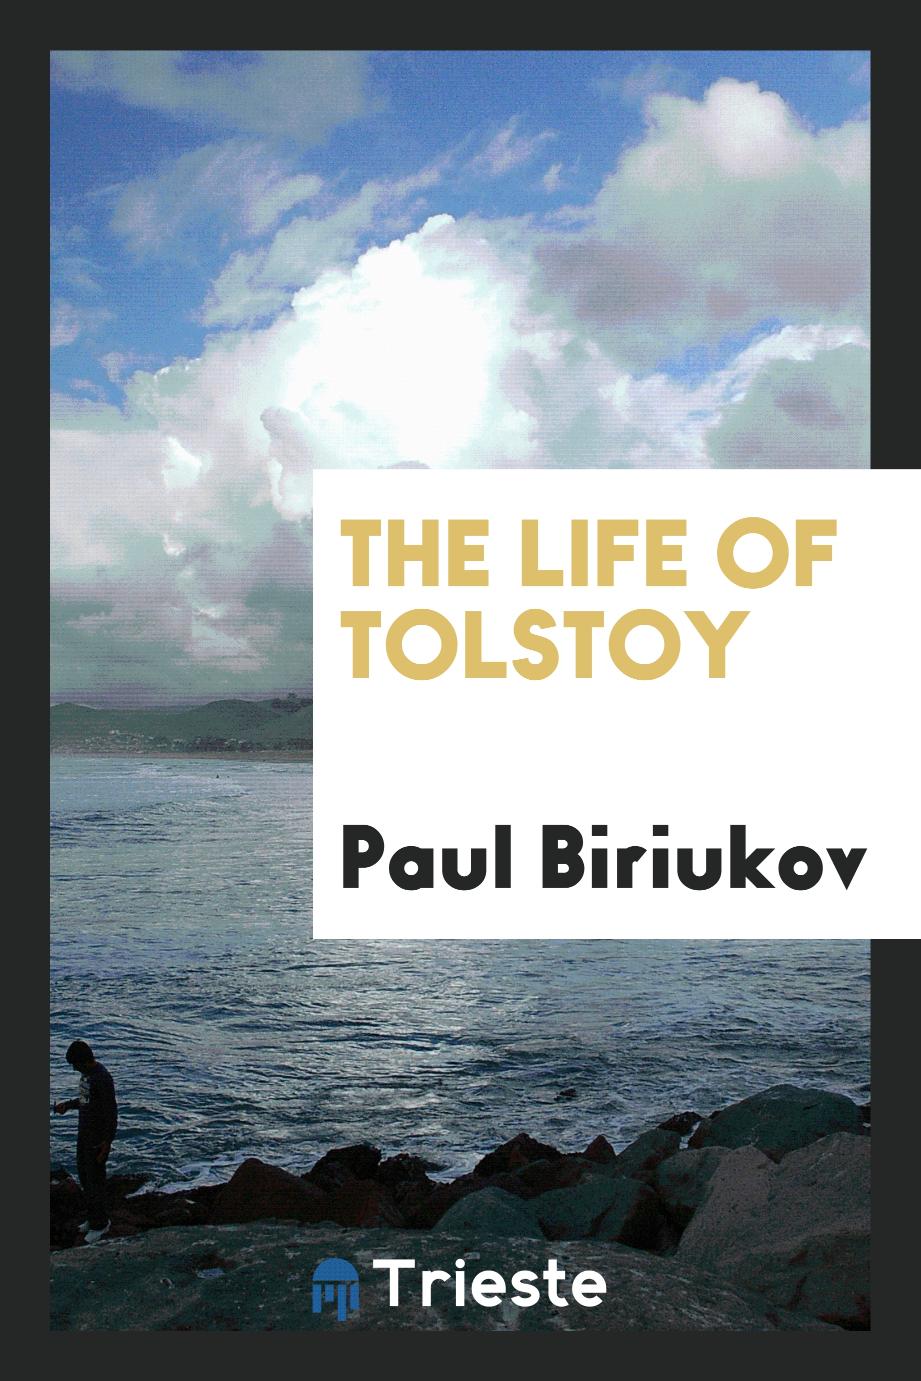 The life of Tolstoy